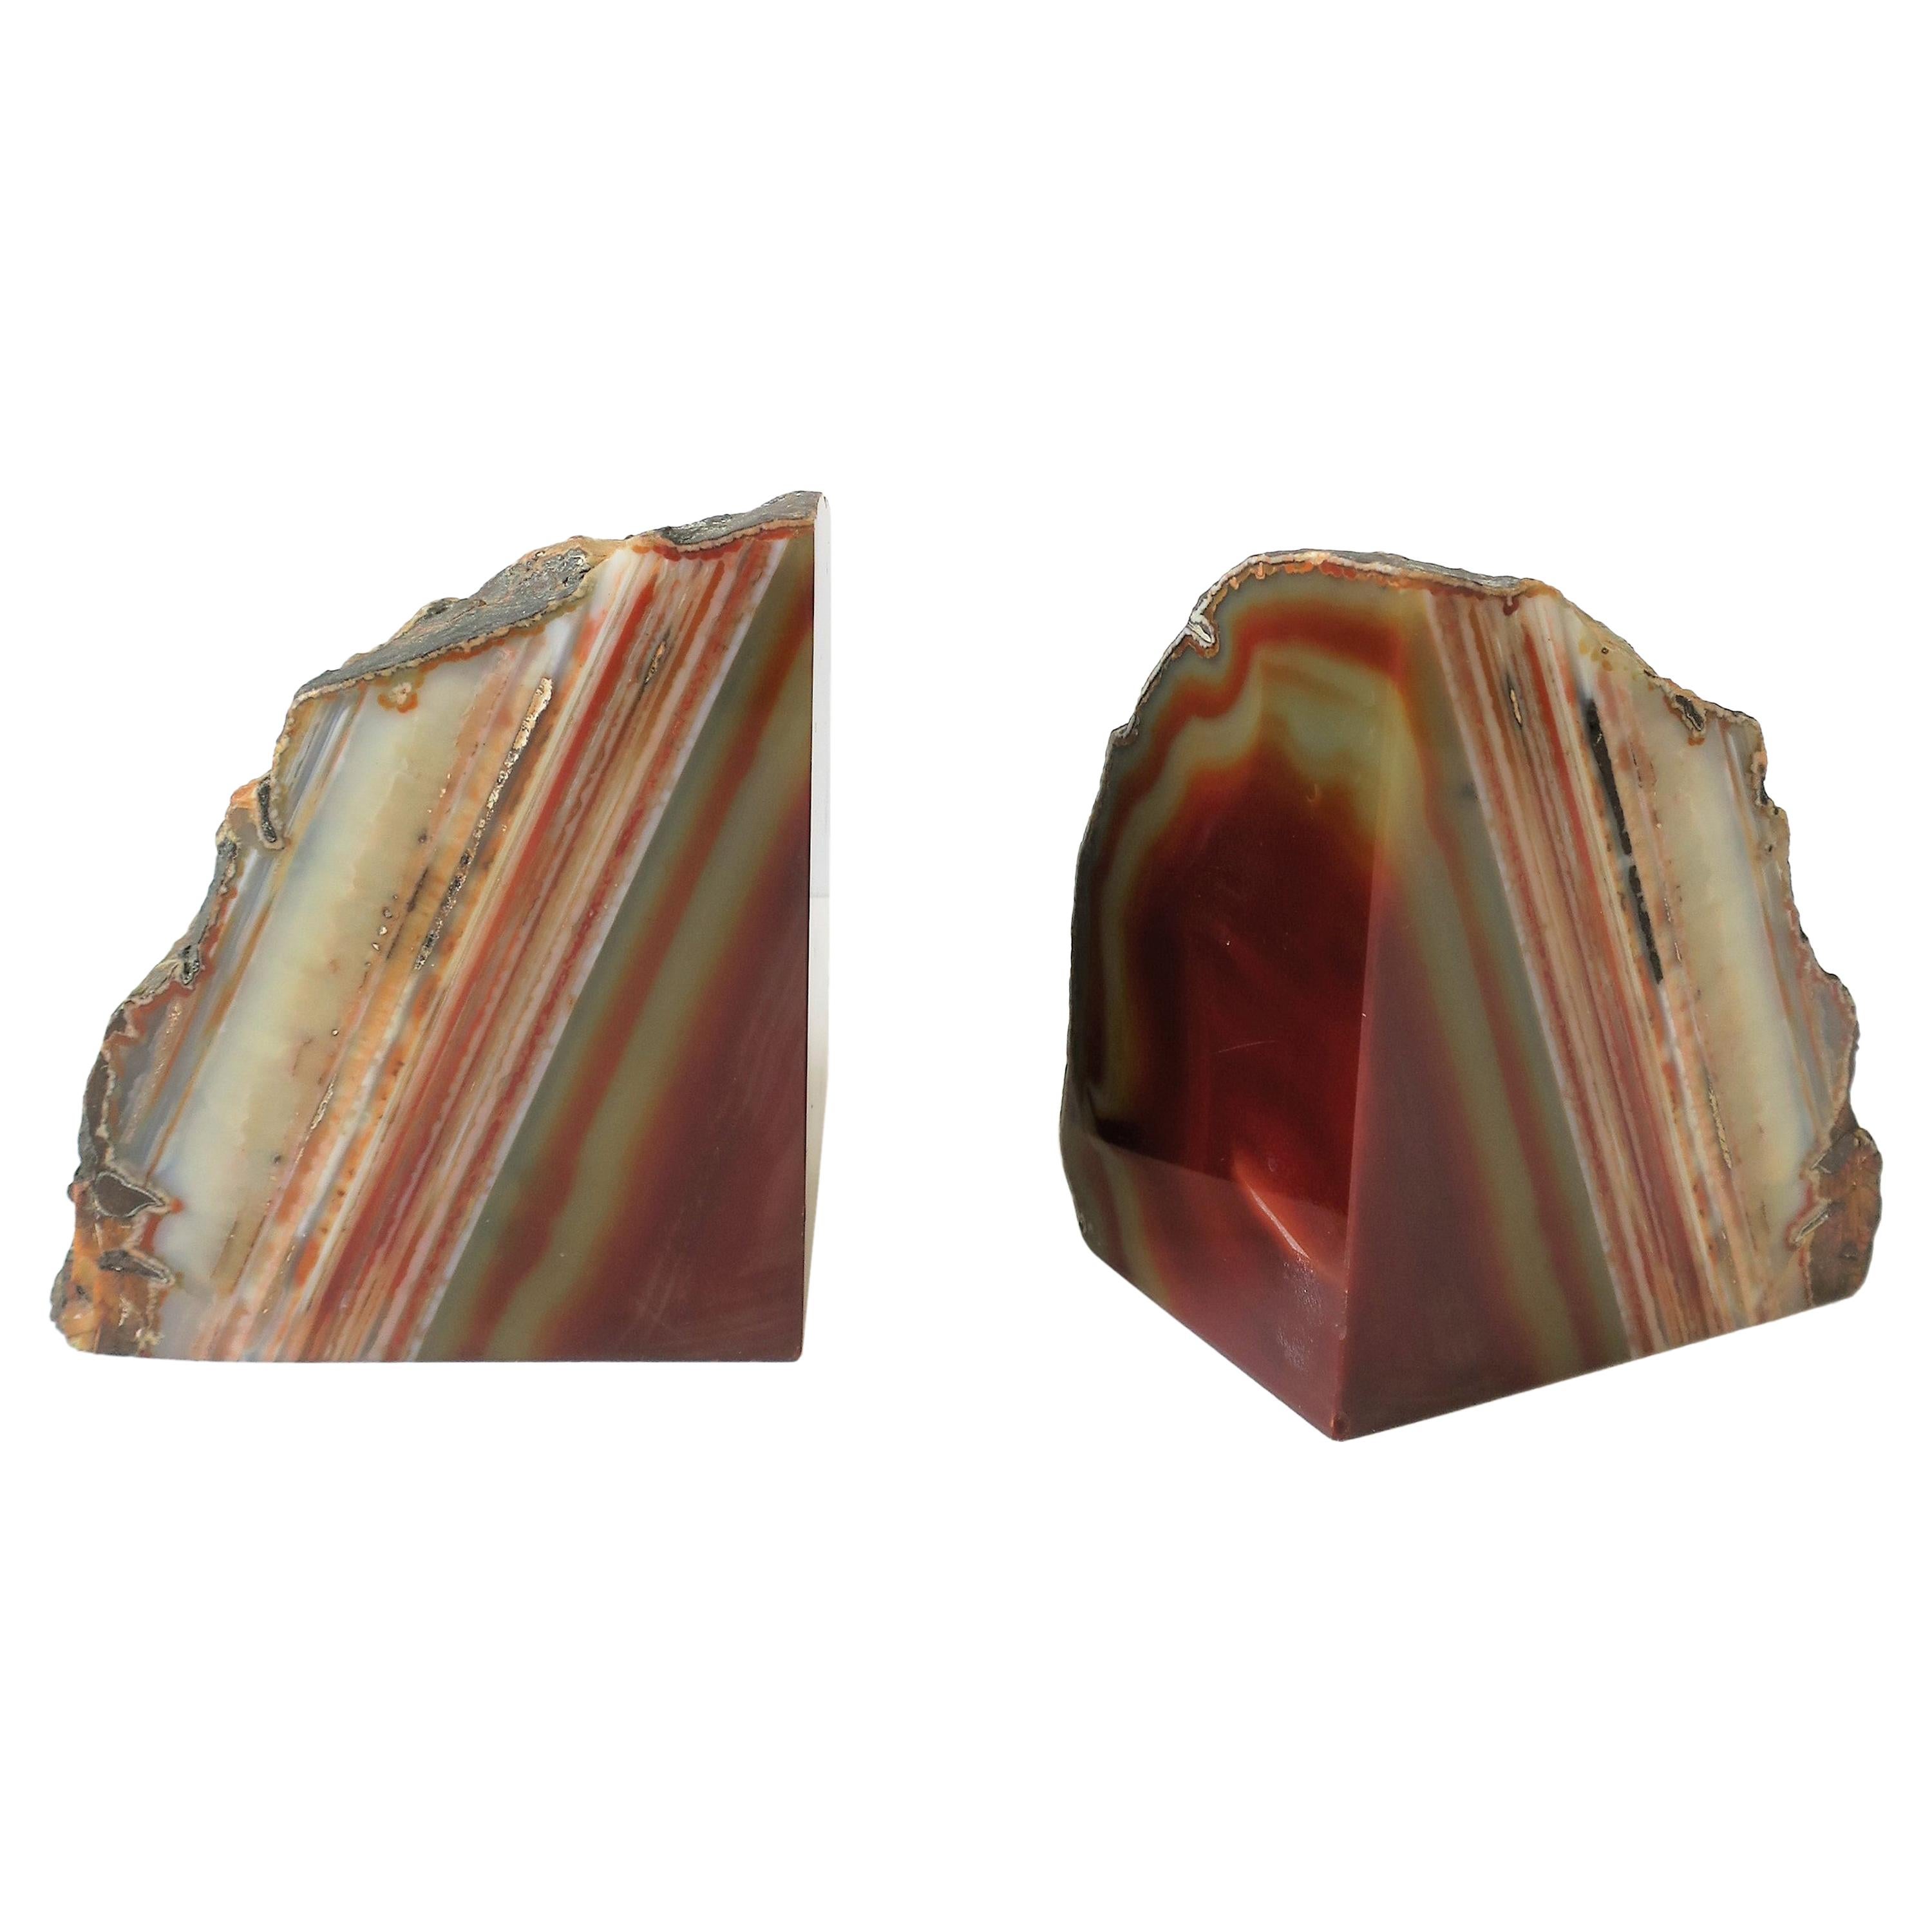  Red Burgundy Onyx Marble Bookends, a Pair, circa 1970s